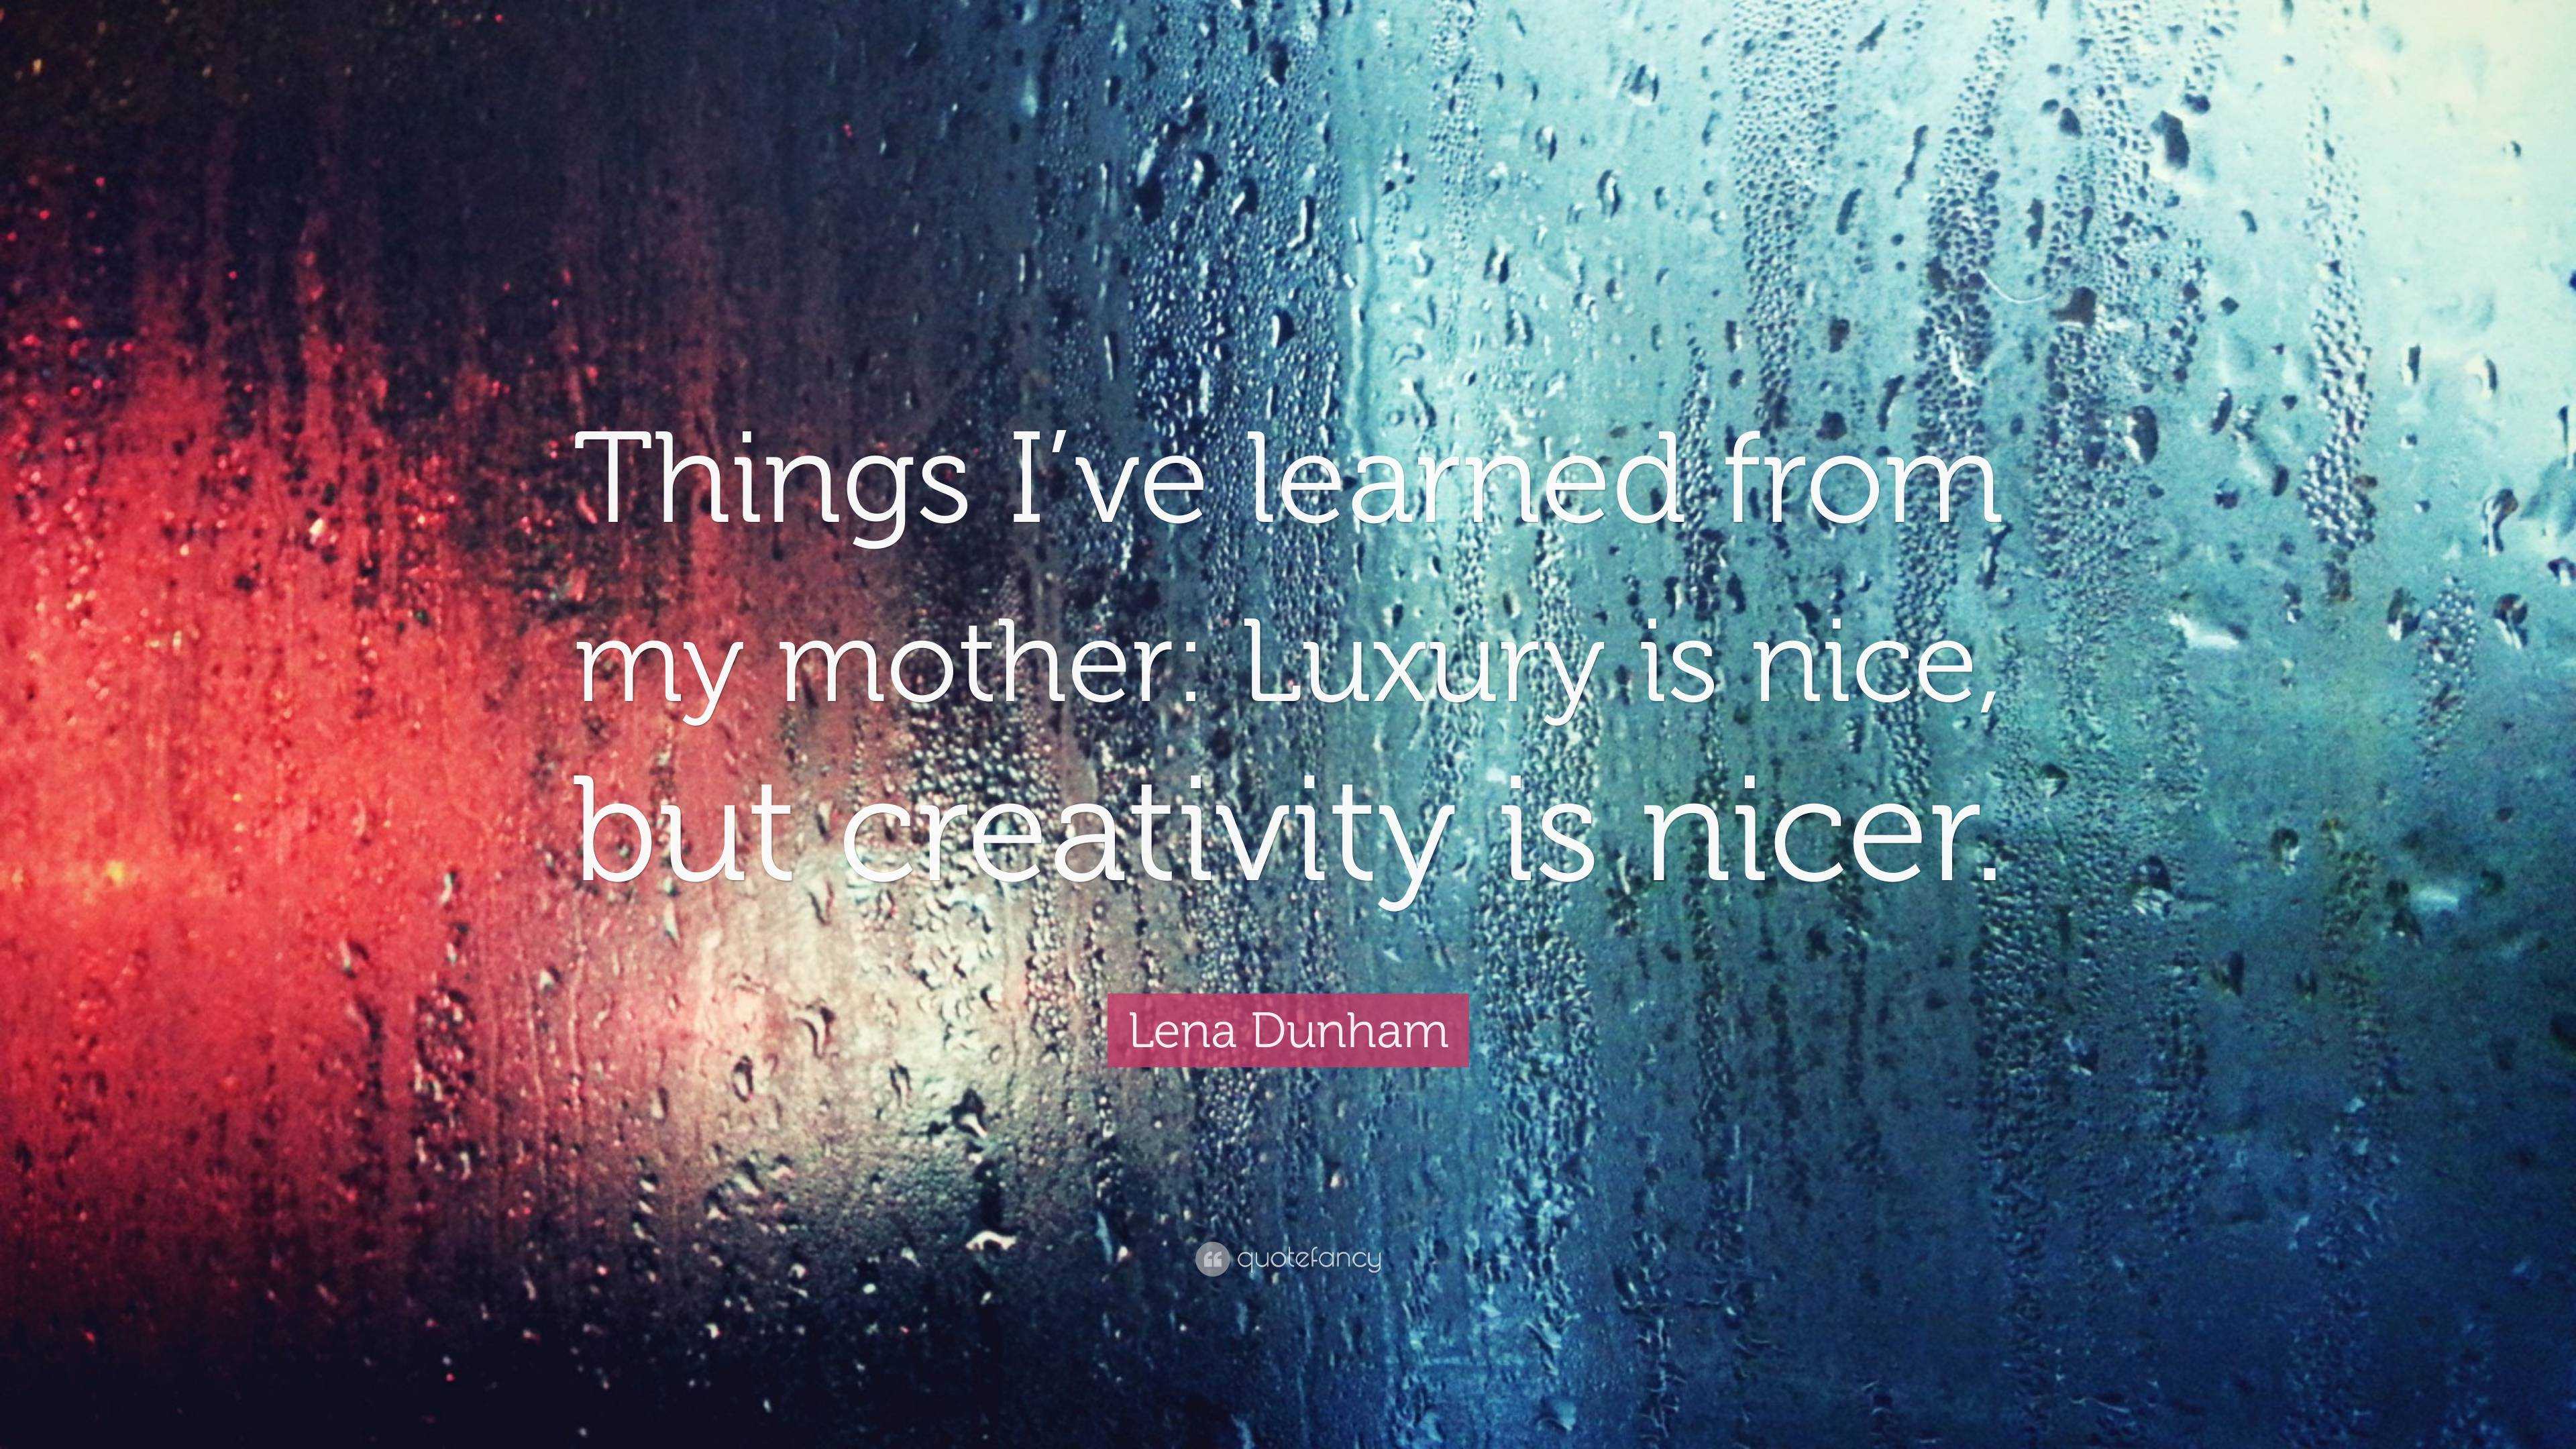 Lena Dunham Quote: “Things I've learned from my mother: Luxury is